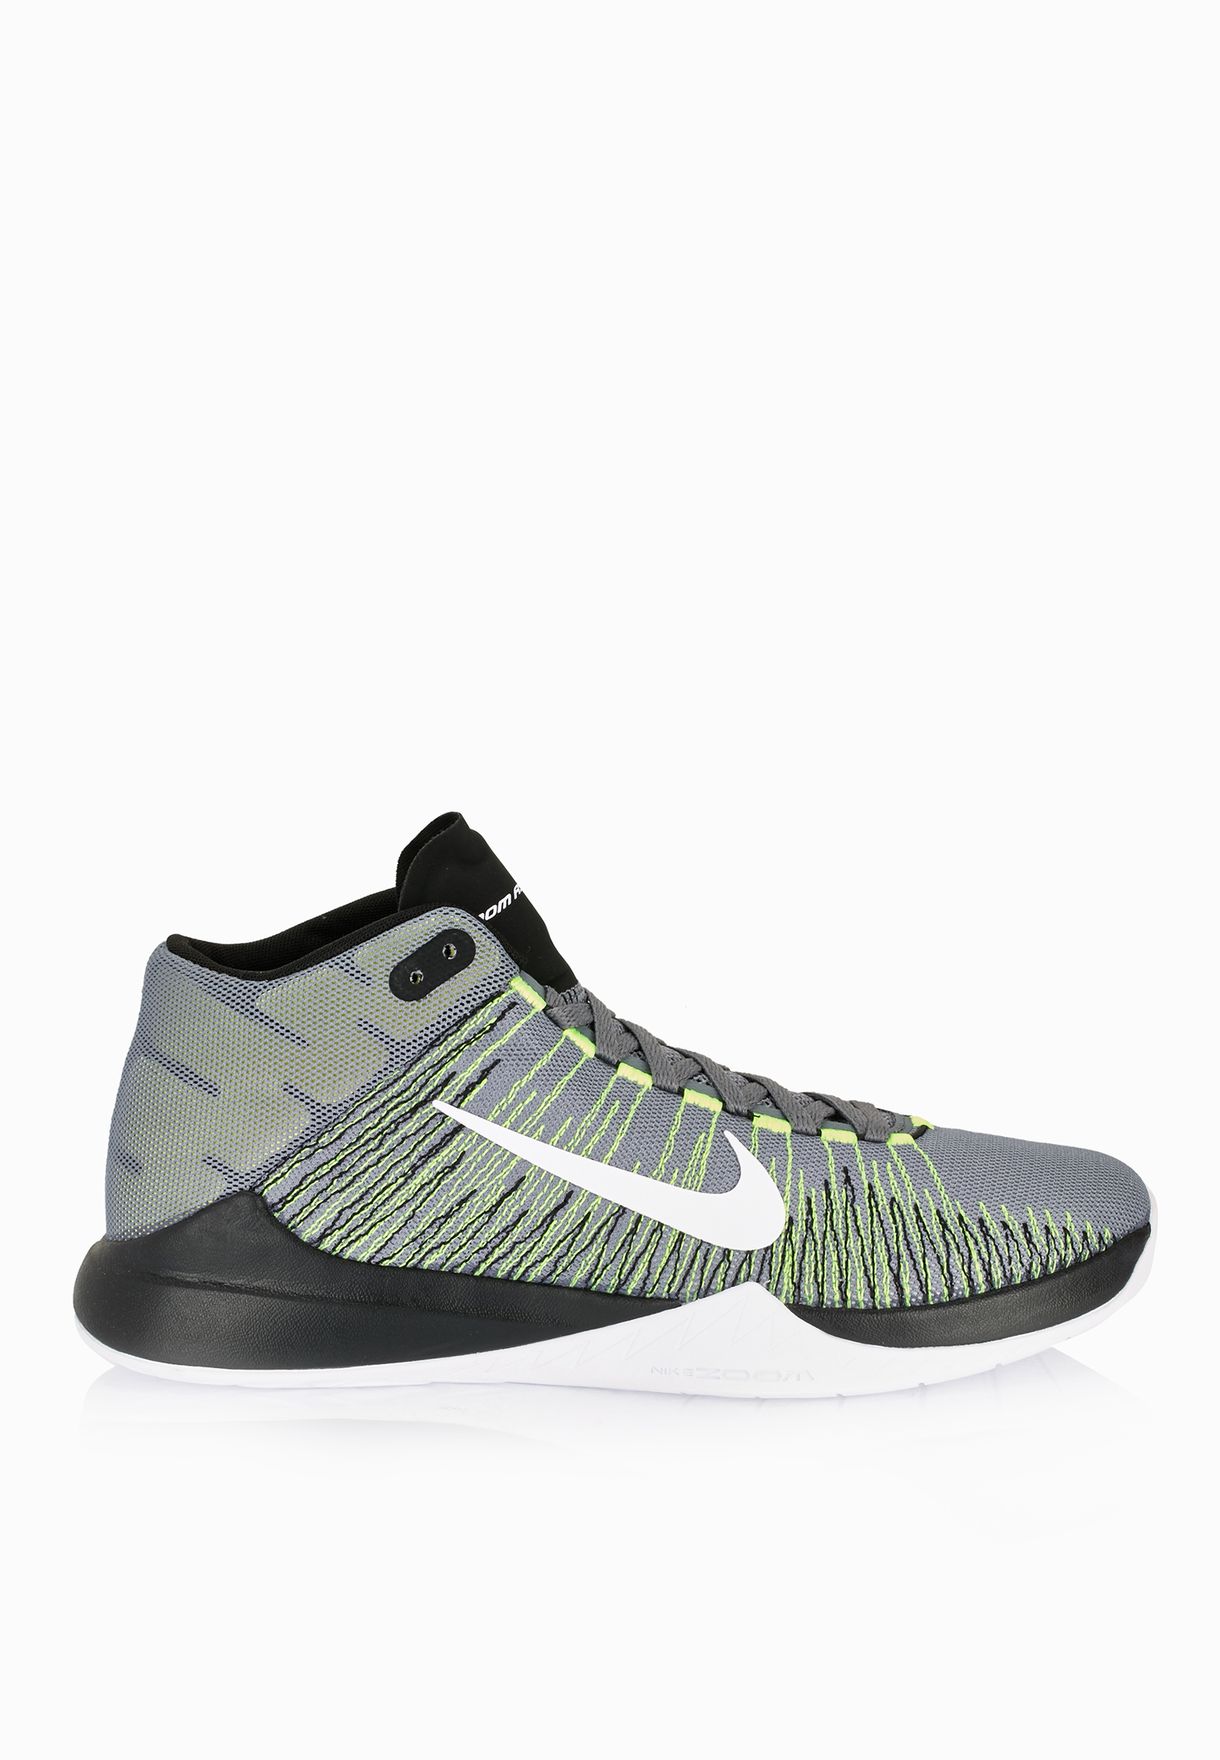 nike zoom ascention price